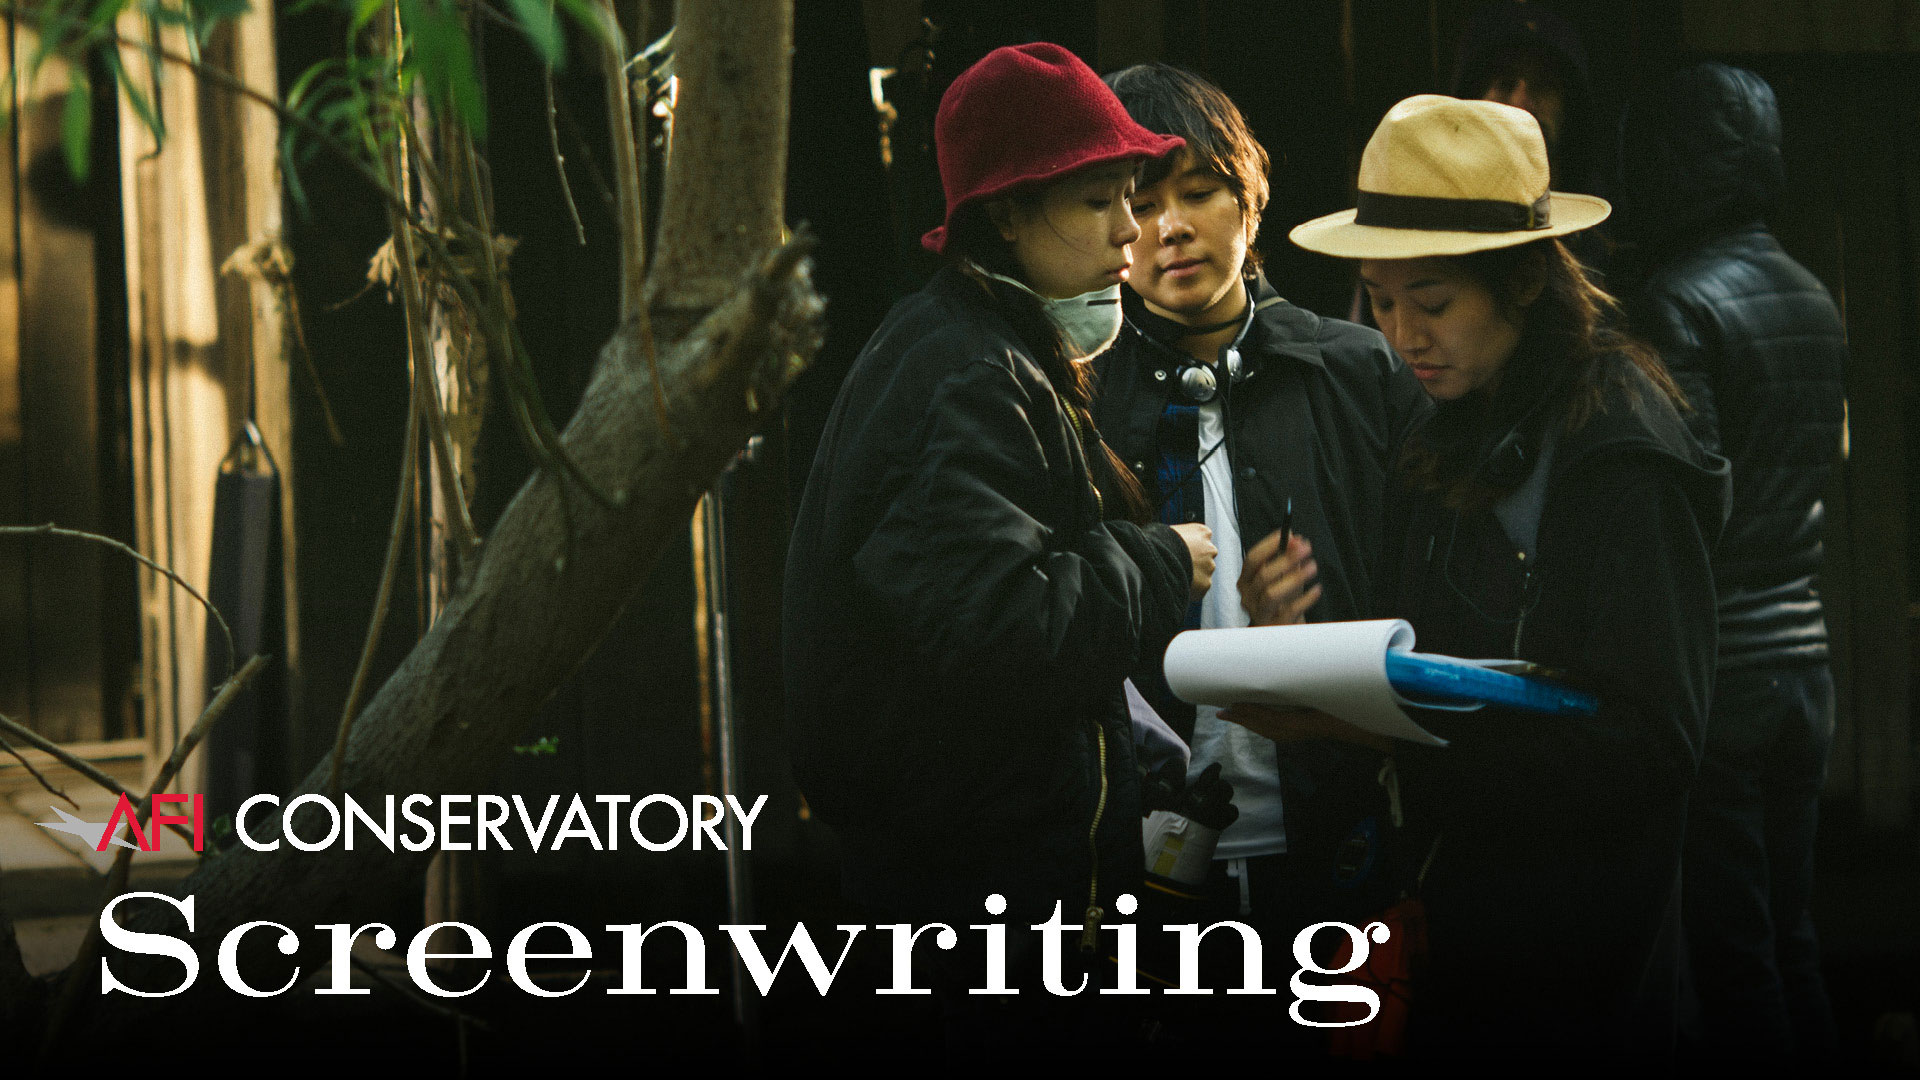 Three female filmmakers huddled together on an outdoor film set and discussing the script. Over the image, there is the following text: AFI Conservatory Screenwriting